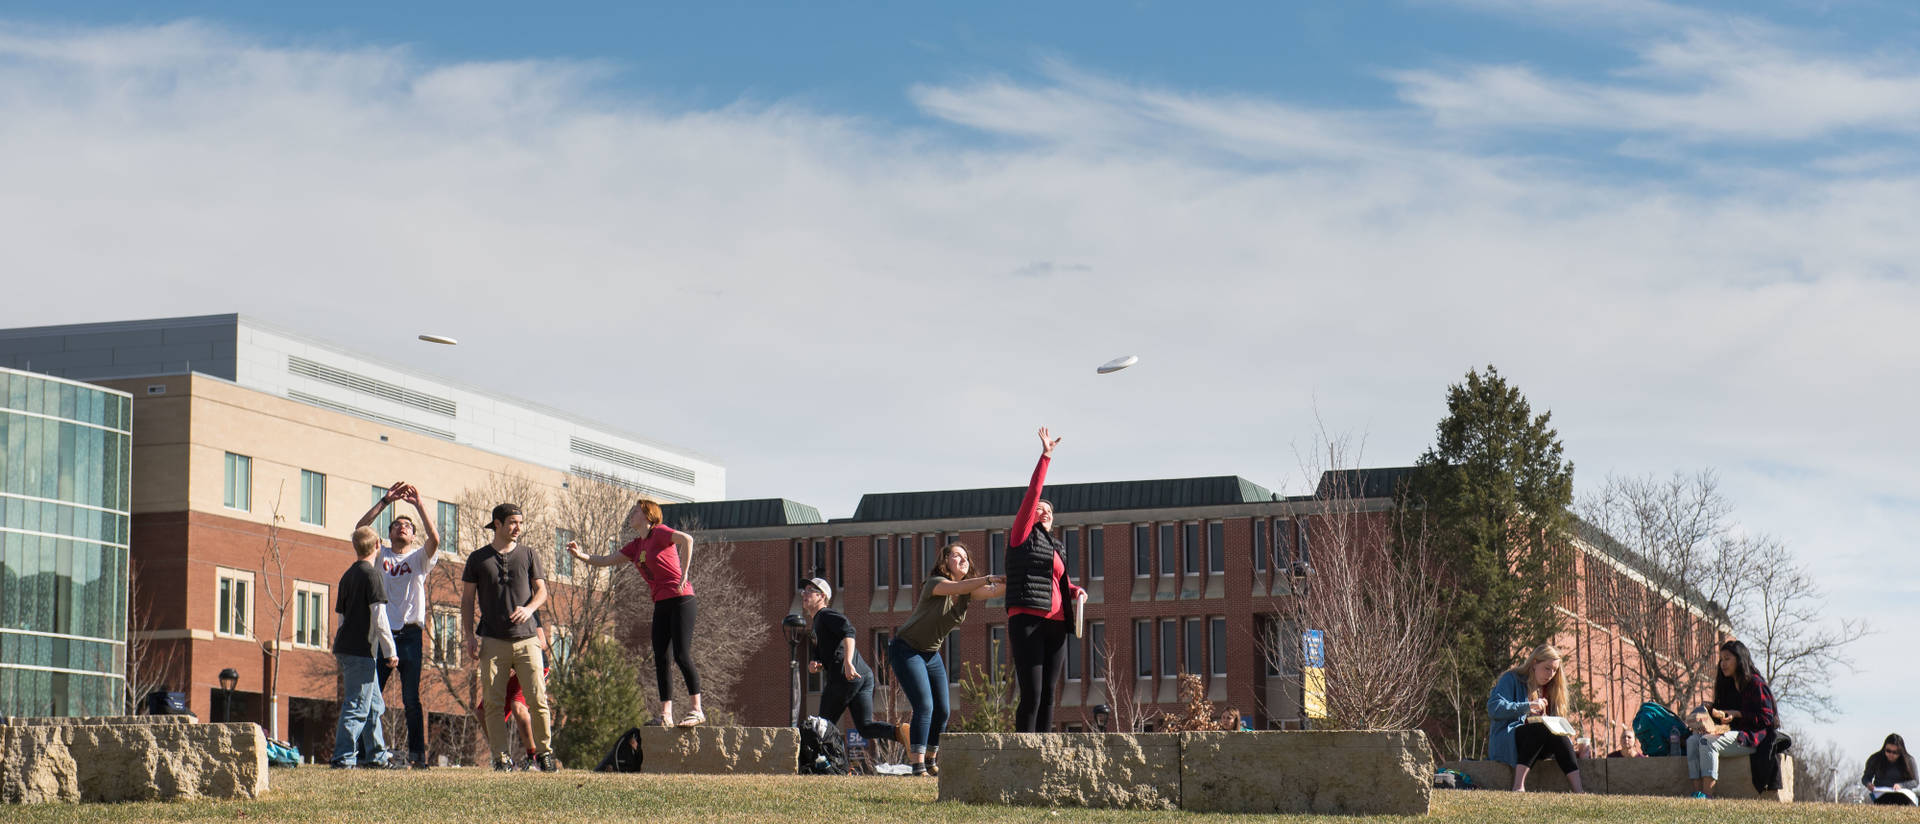 Students playing Frisbee in the campus mall